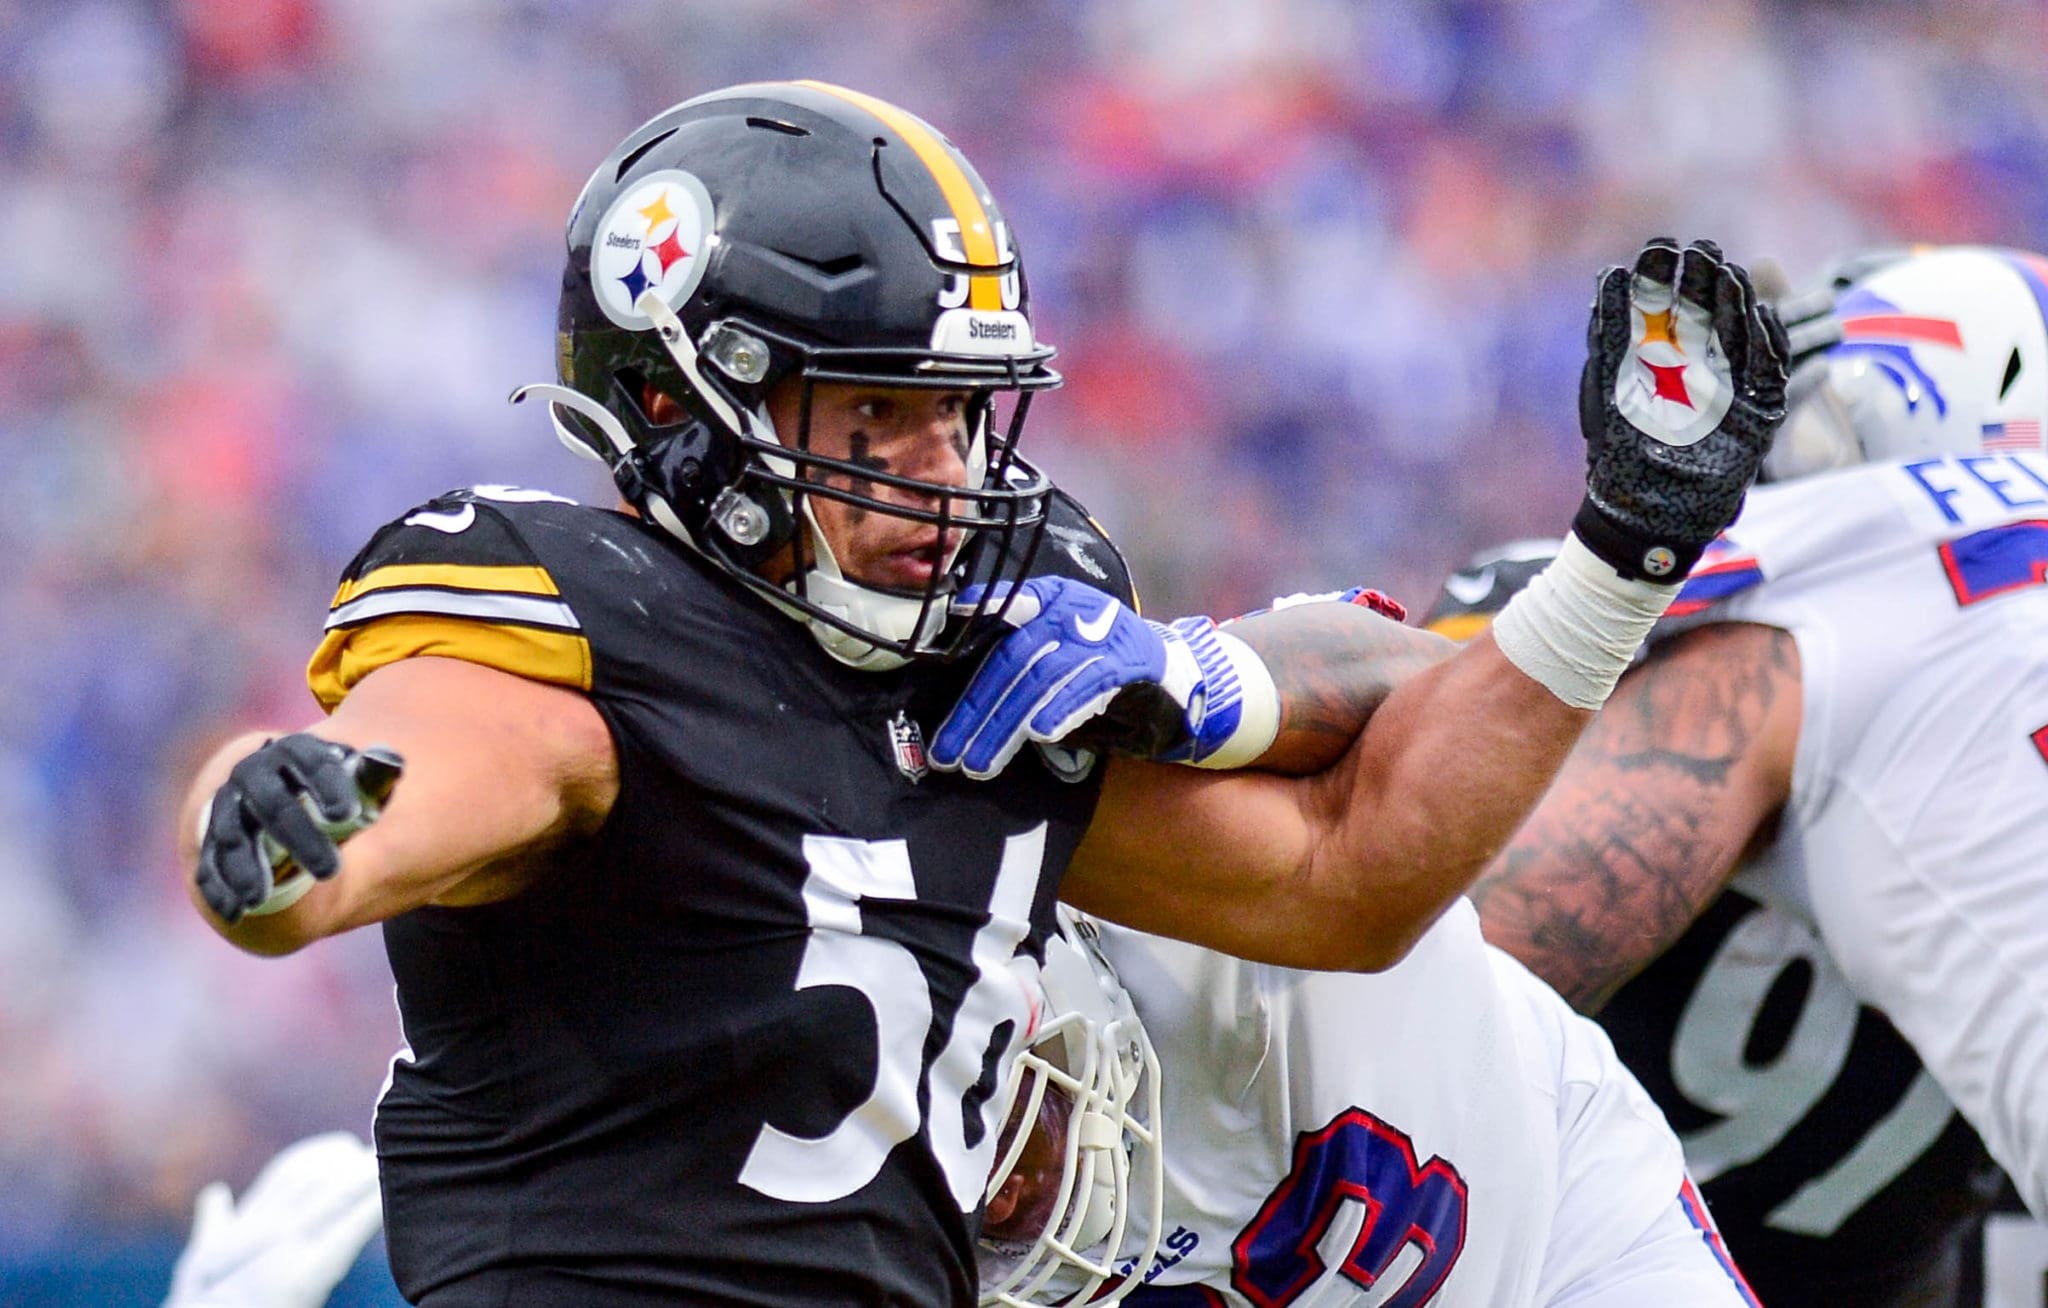 Steelers-Bills Most Widely Broadcast 1 p.m. Game This Week